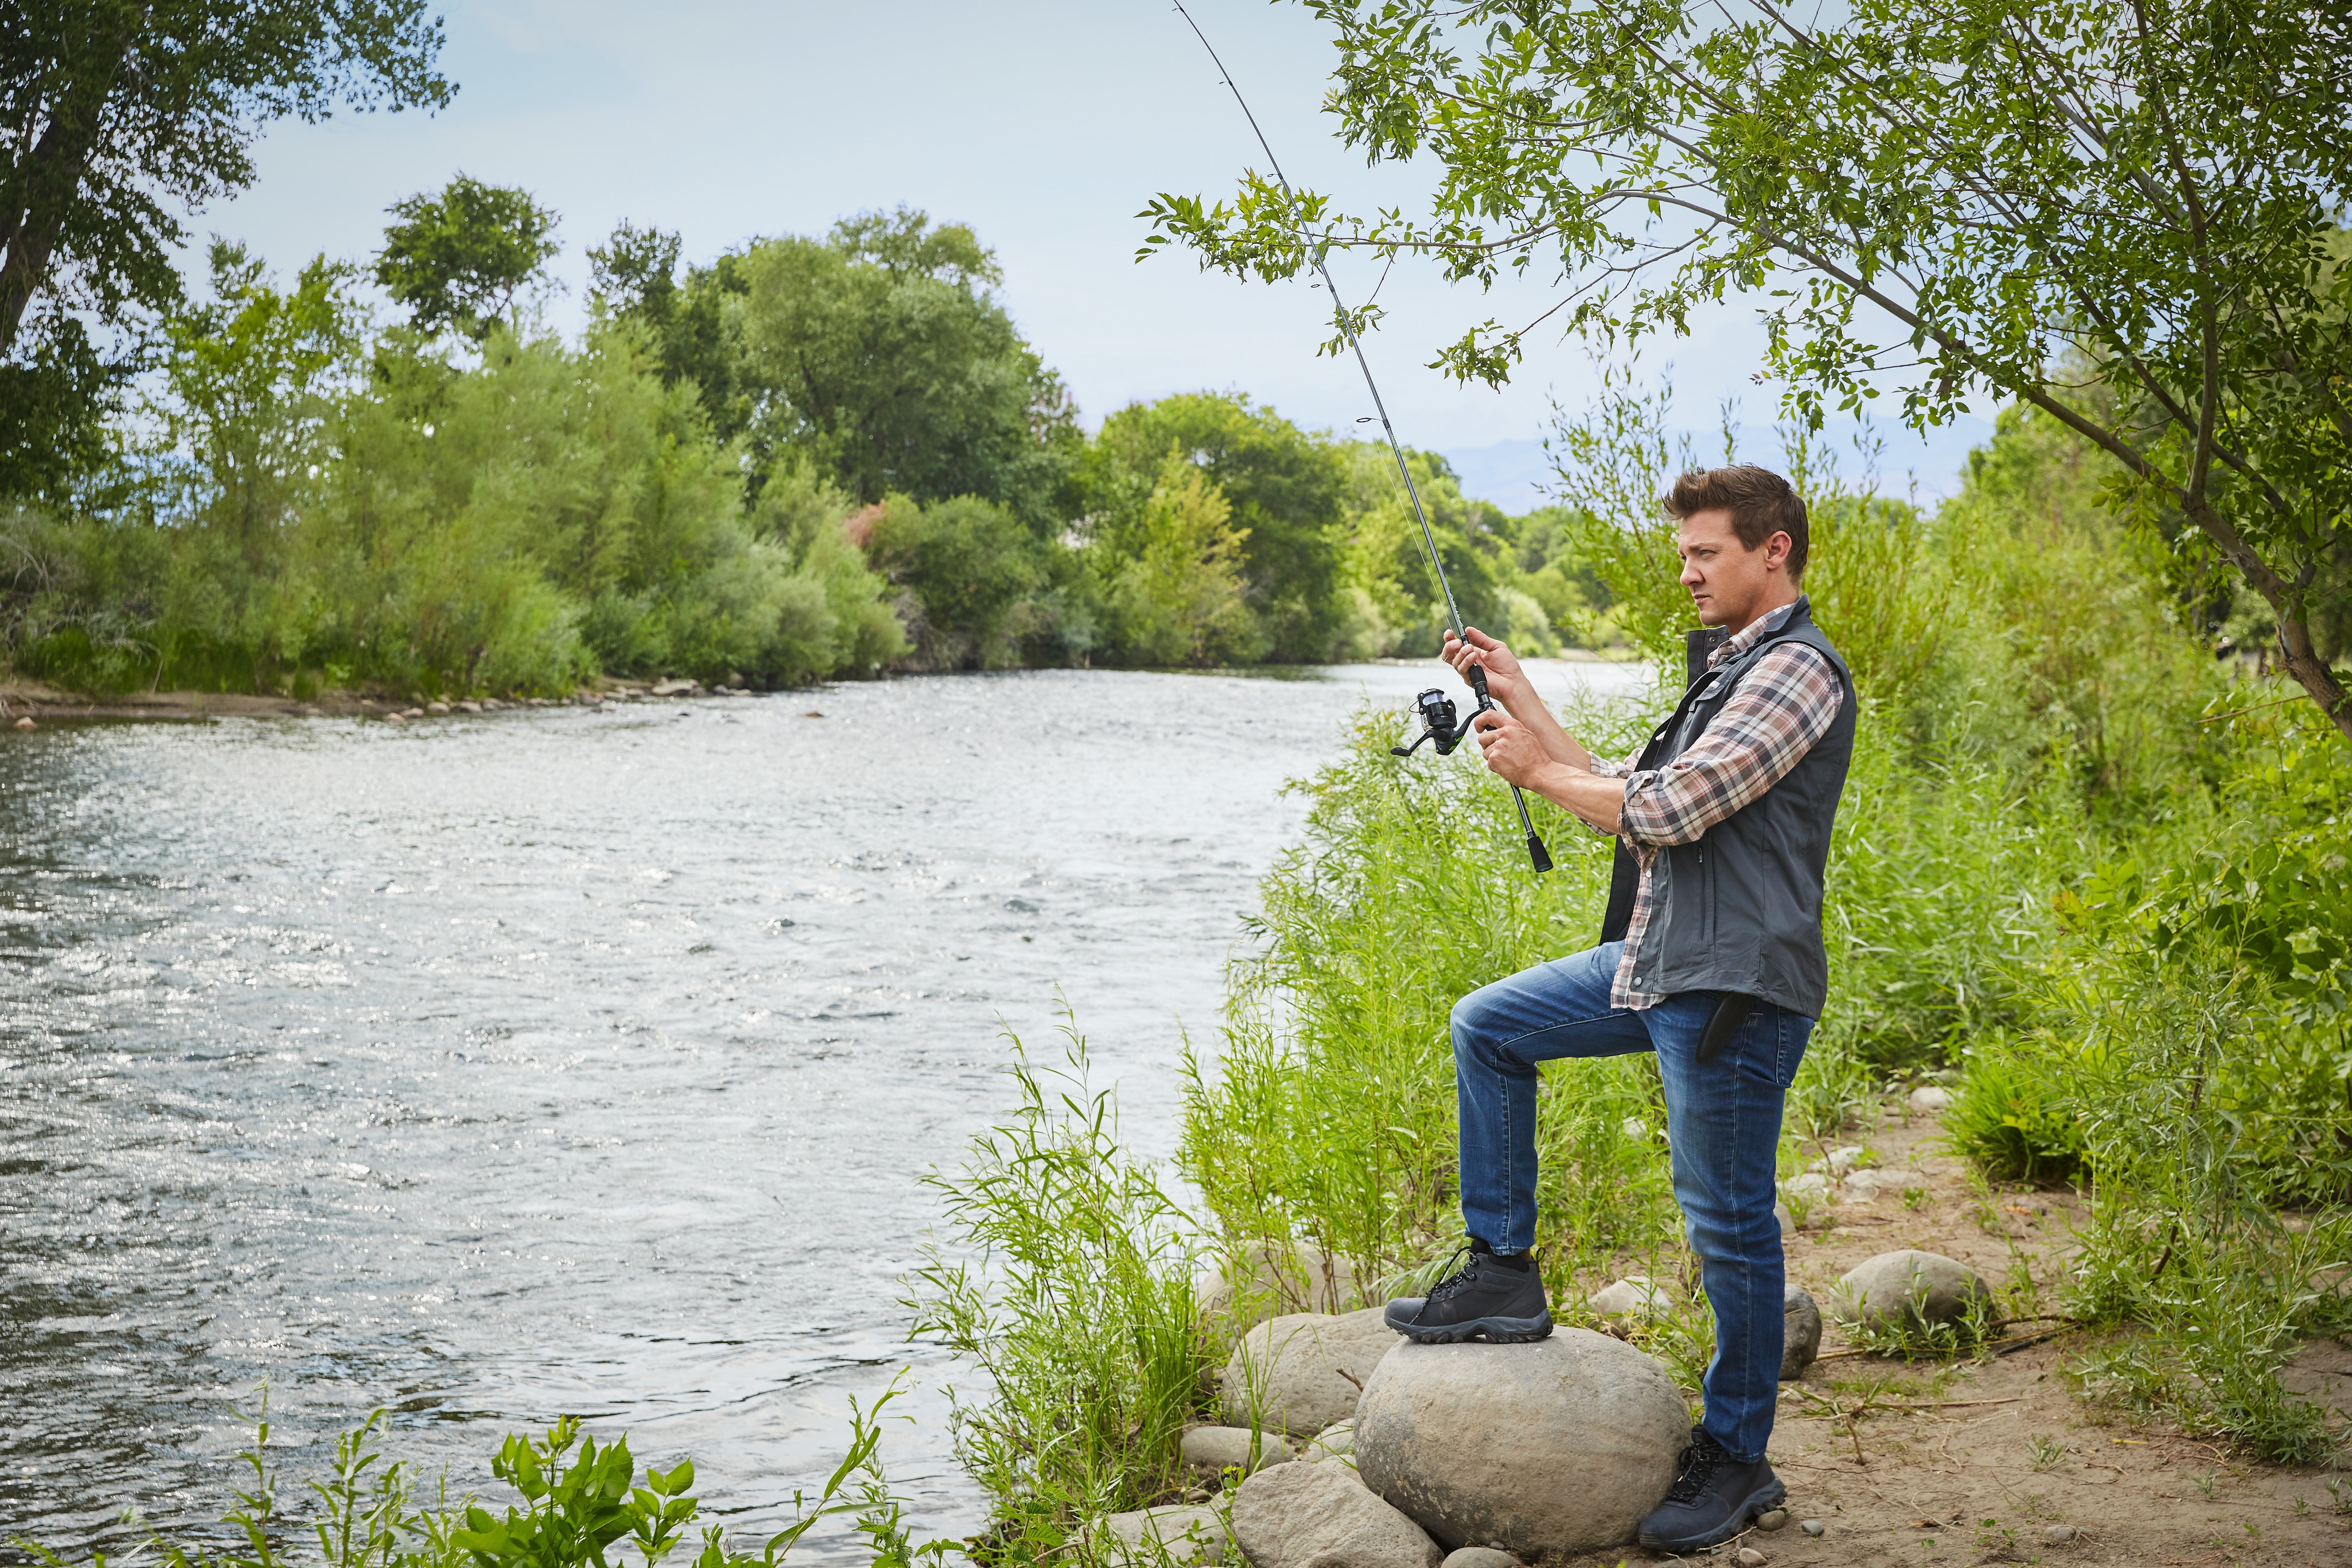 Jeremy Renner stands with one foot on a rock, holding a fishing rod that appears to have no line cast.